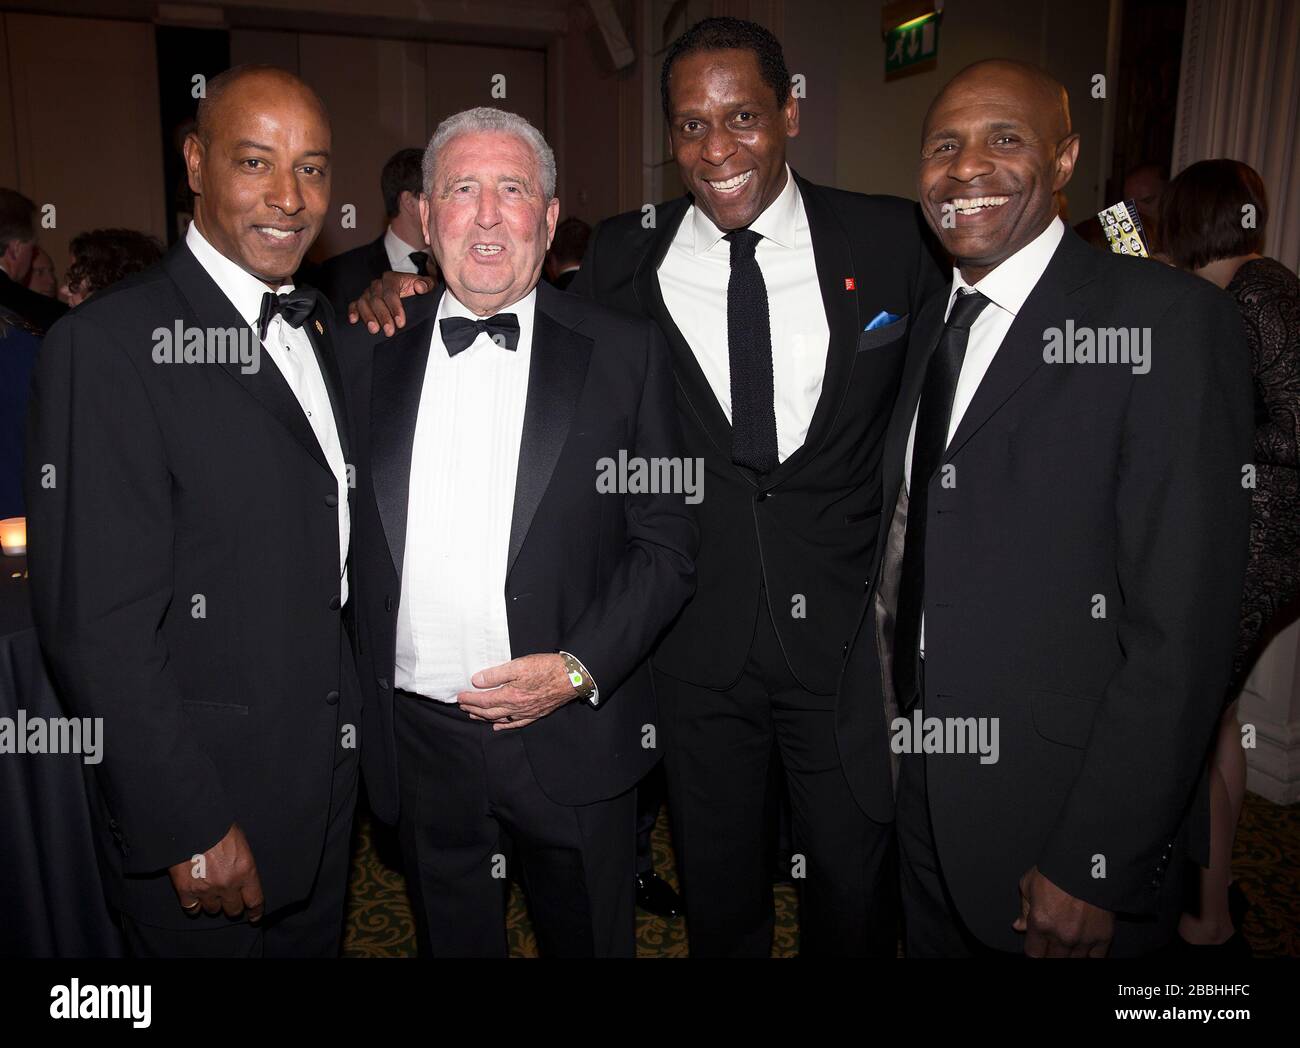 Brendon Batson (left), Bobby Campbell (second left), Ken Monkou (second right) and Luther Blissett (right) pose for a photograph during the PFA Player of the Year Awards 2013 at the Grosvenor House Hotel, London. Stock Photo